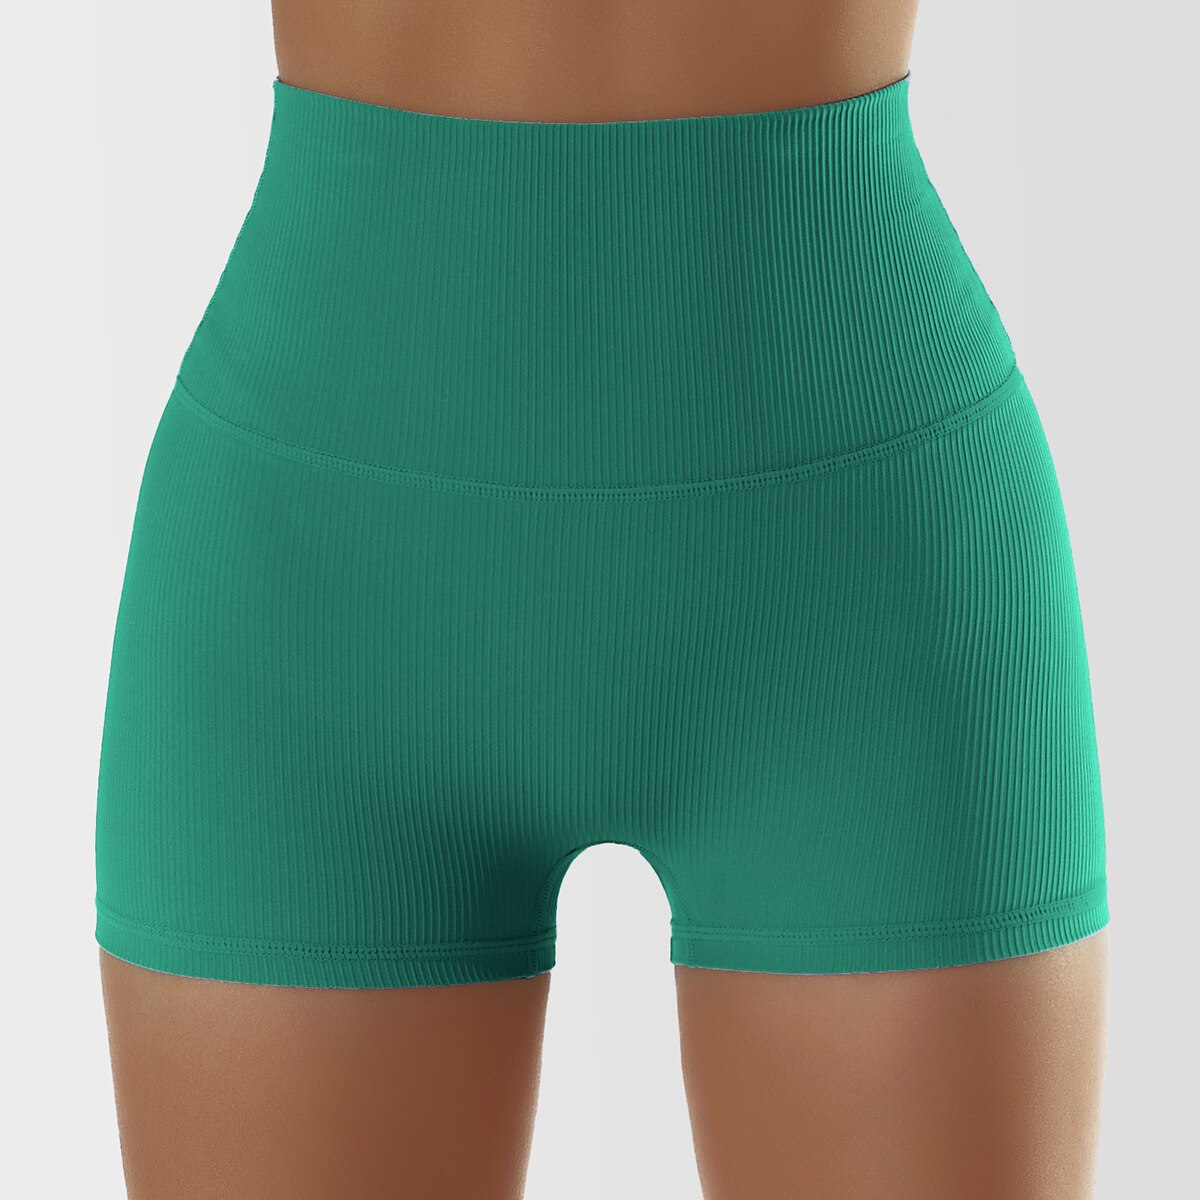 PowerLift Compression Shorts Chic Gym Wear 1pc Shorts-Green 8 S